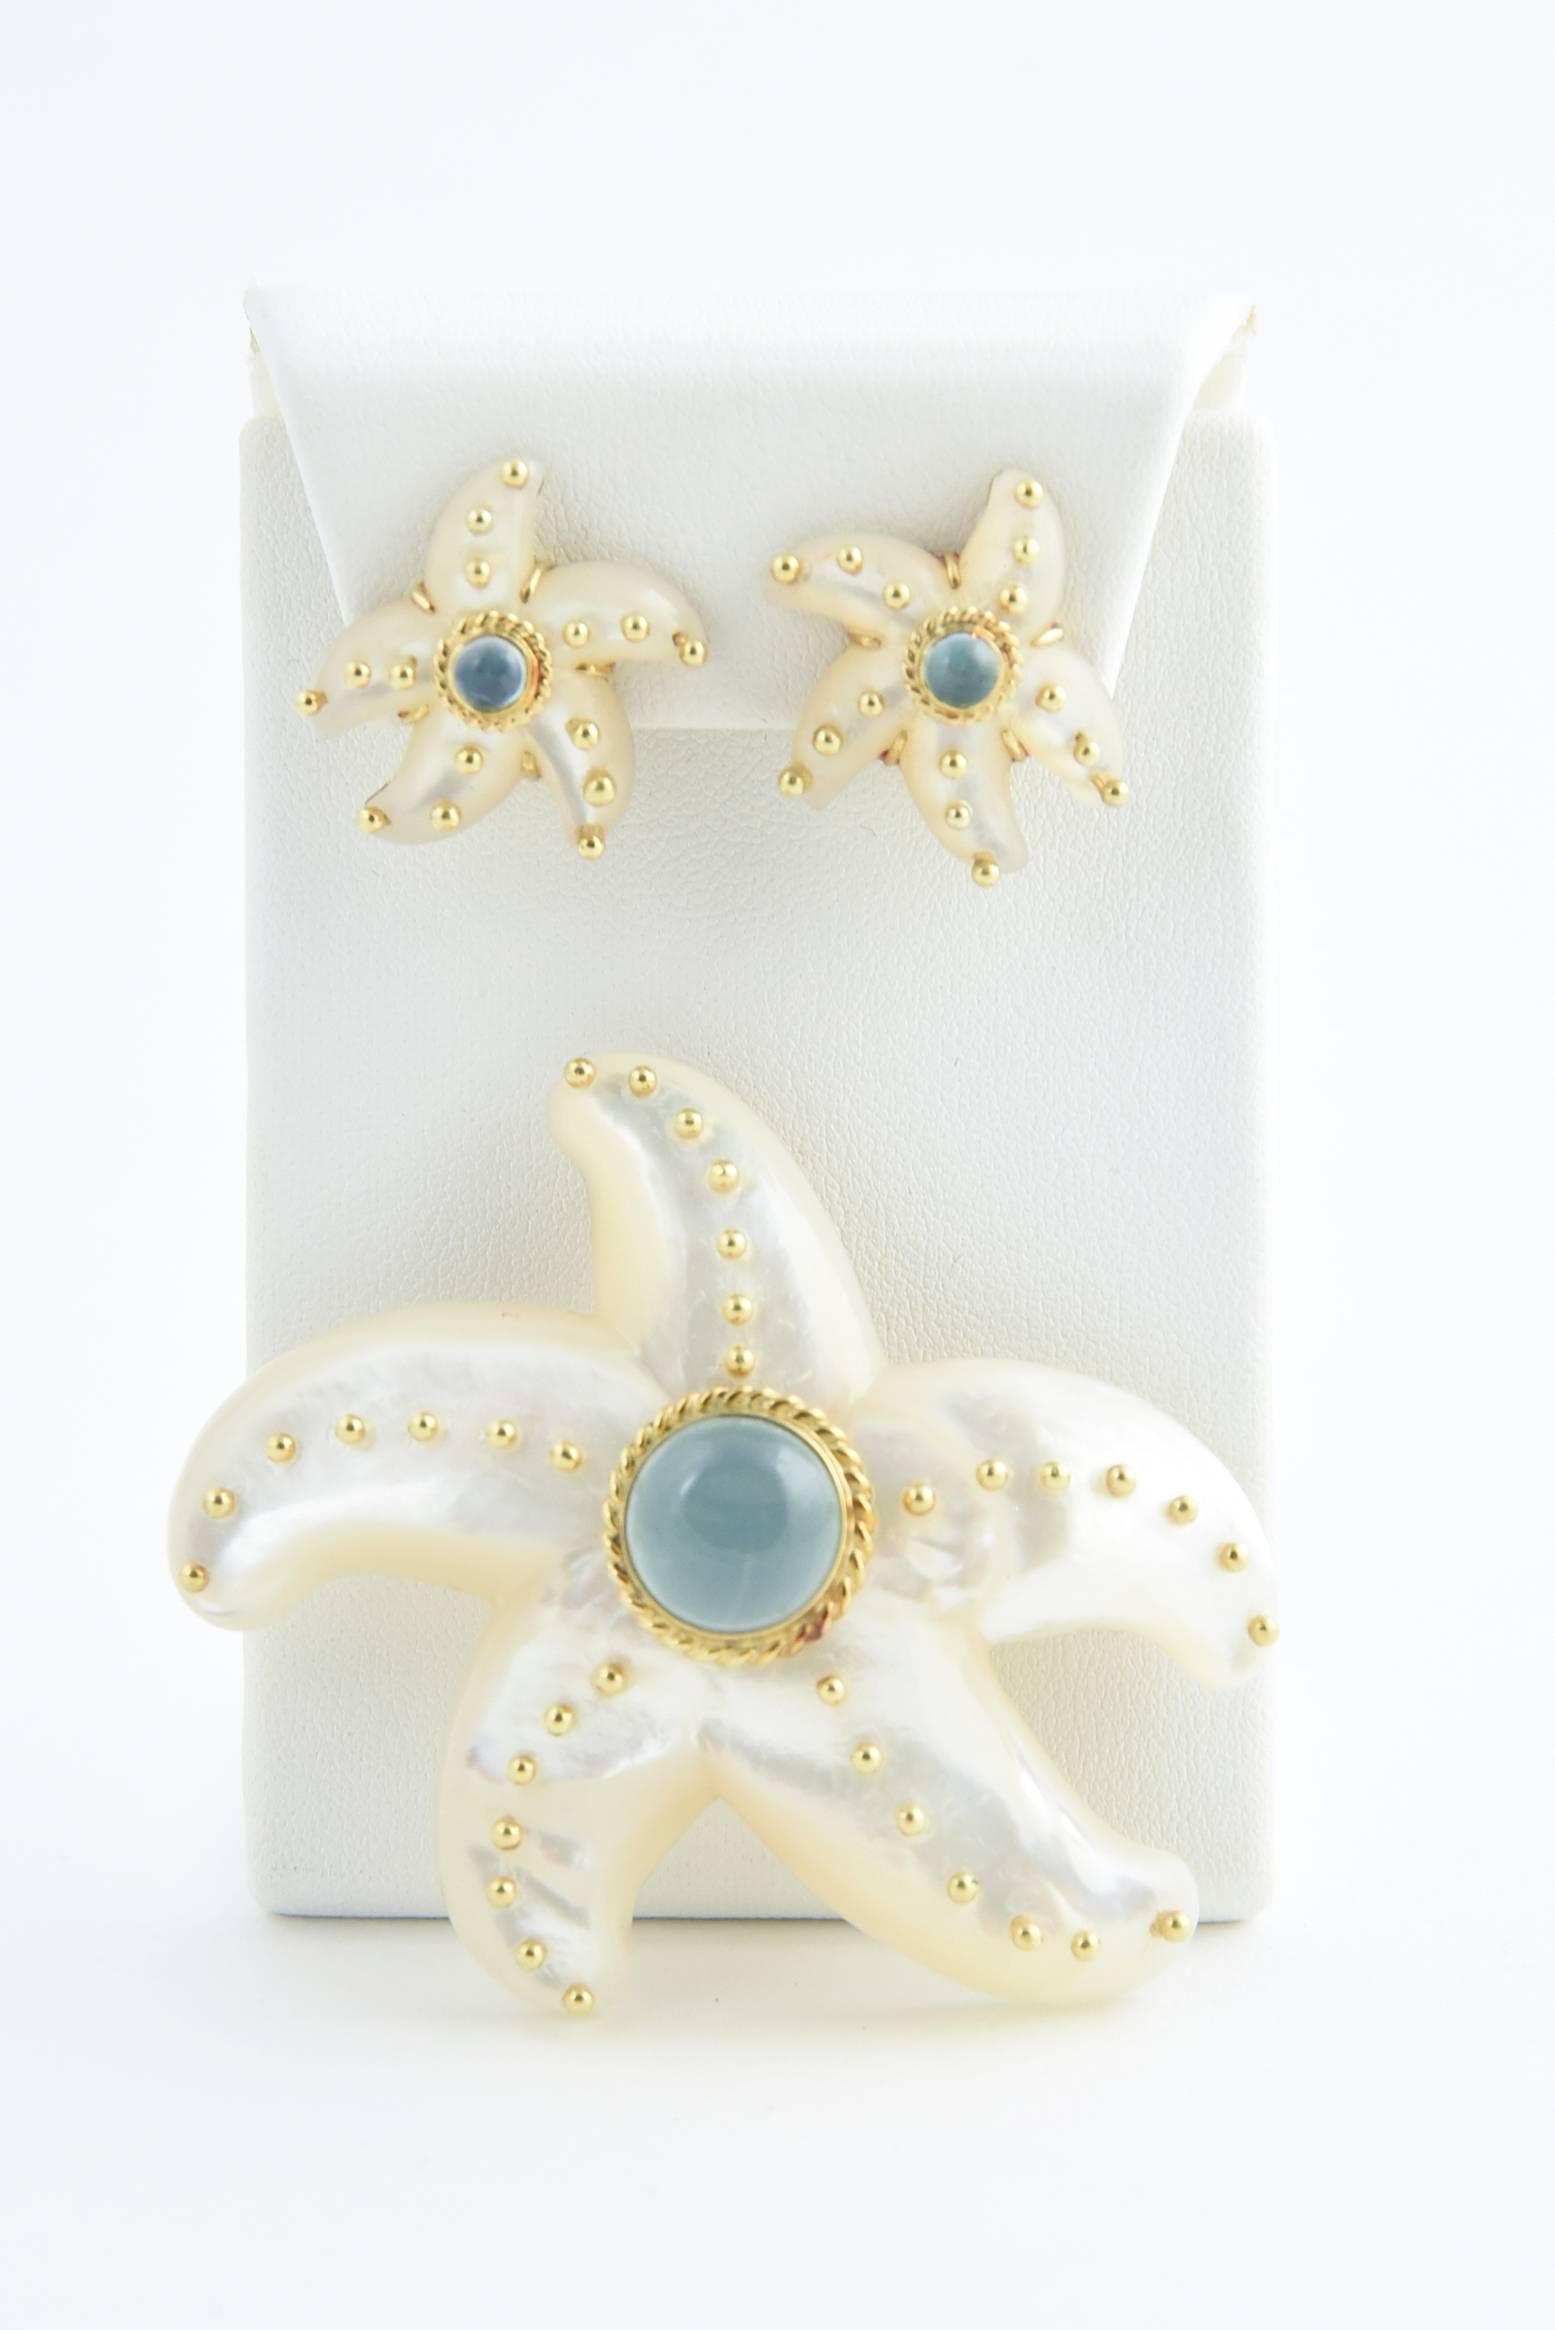 Refreshing reminder of the sea brooch pendant and matching earrings by MAZ of Italy.  Mother of Pearl starfishes with 14k yellow gold and blue tourmaline accents.

Brooch / Pendant 2.5 Length X 2 Width X  .65 depth
Below is the earring